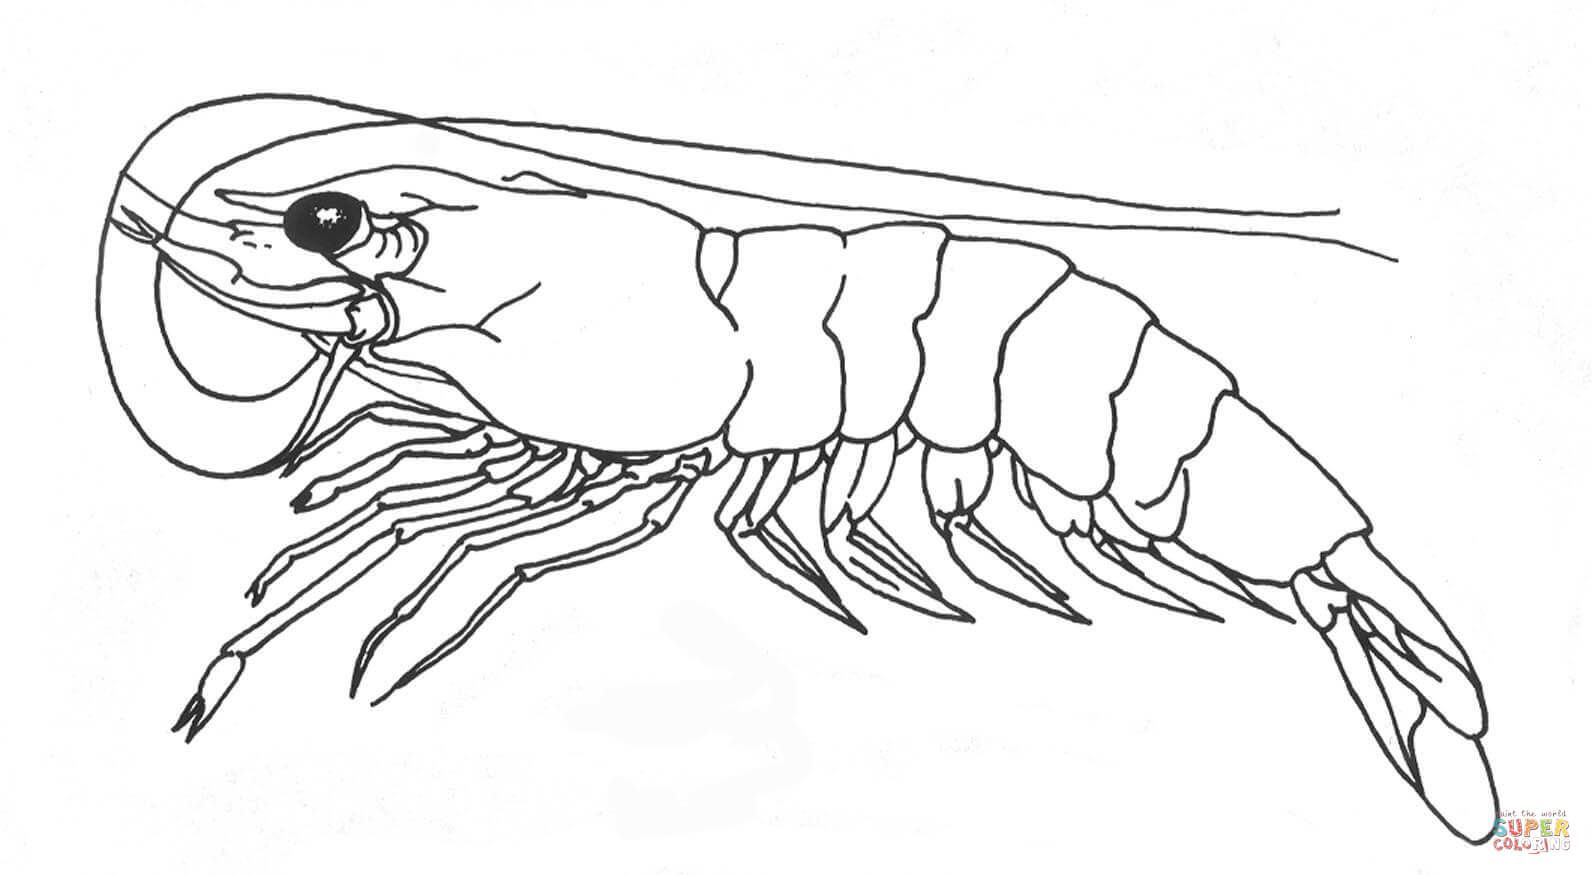 Shrimp coloring page from Shrimp category. Select from 27007 ...